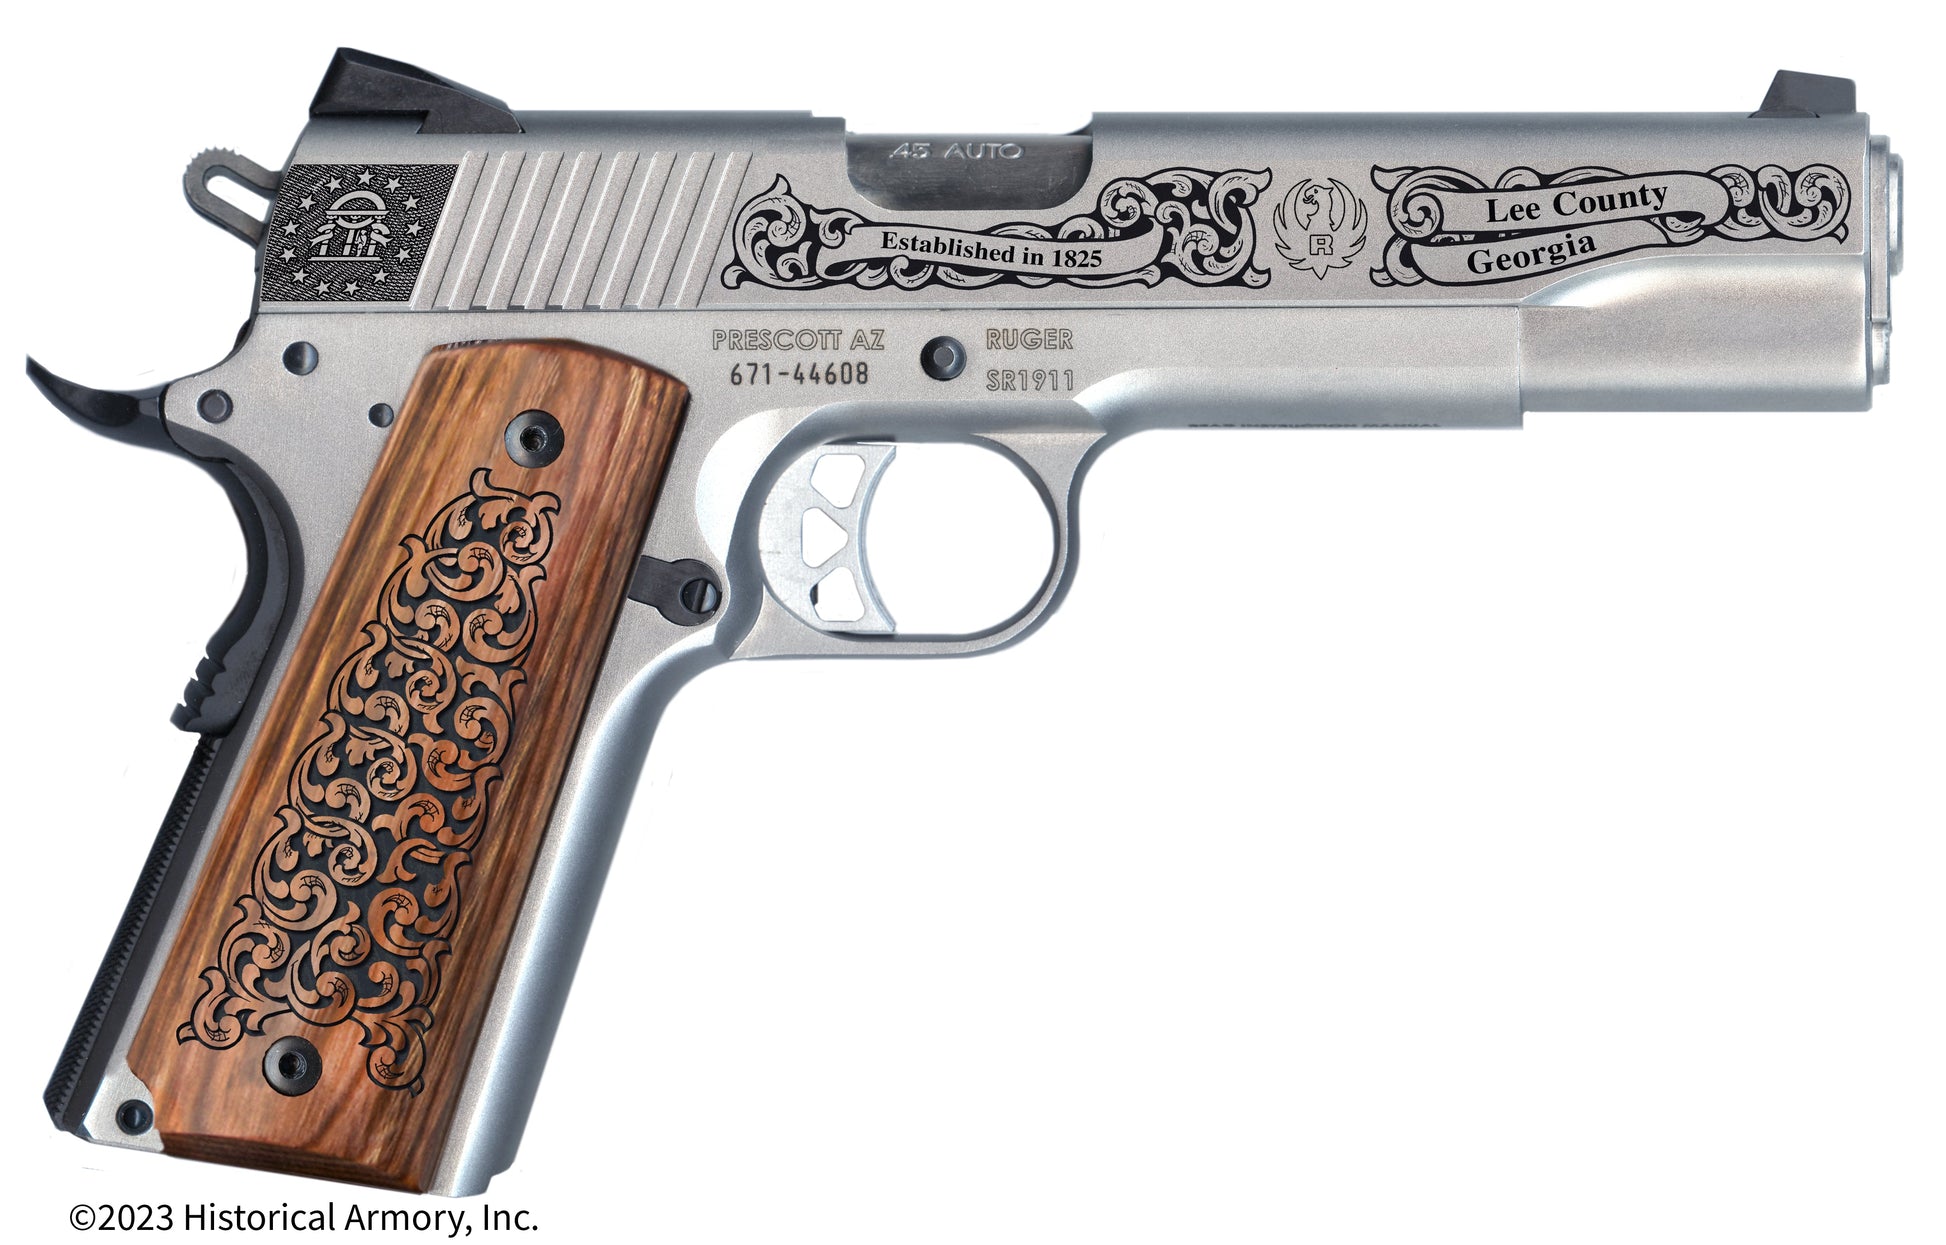 Lee County Georgia Engraved .45 Auto Ruger 1911